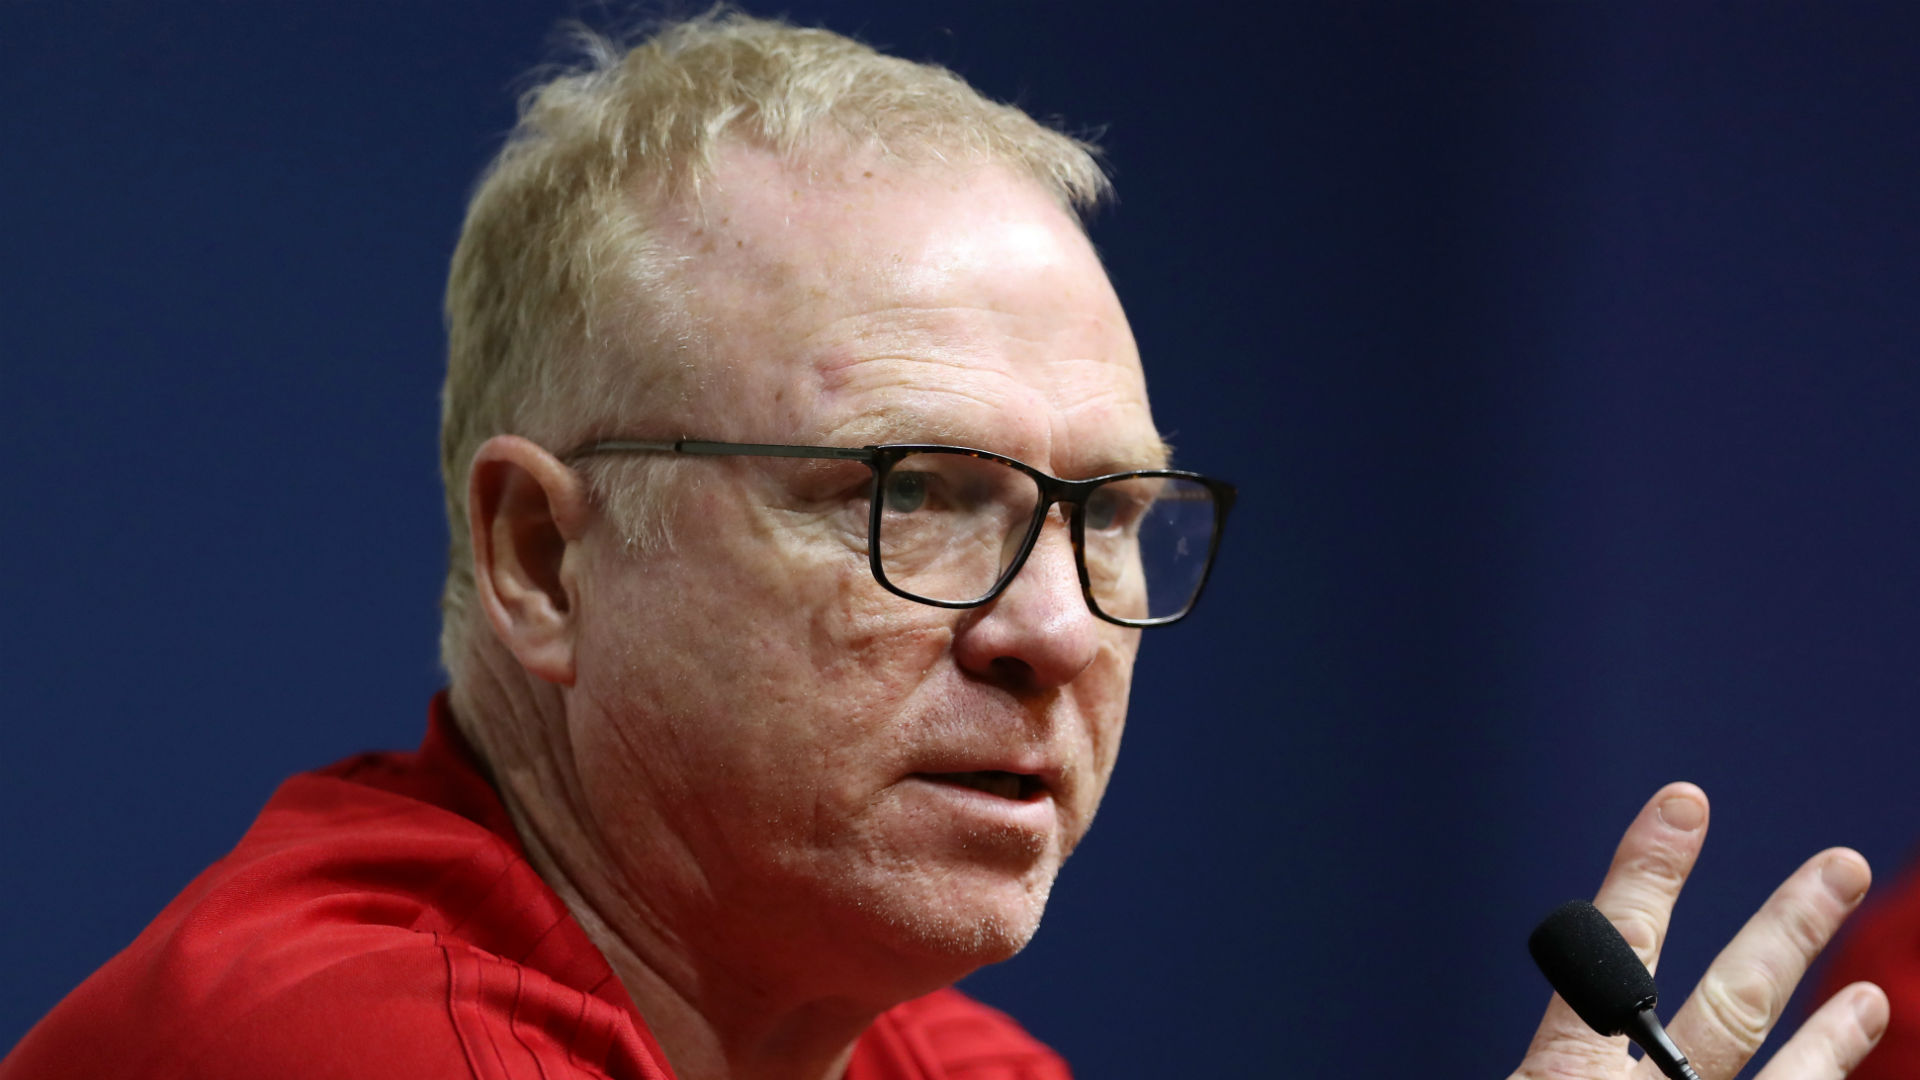 Scotland manager Alex McLeish offered a tight-lipped response to questions over his future after his team's loss to Kazakhstan.